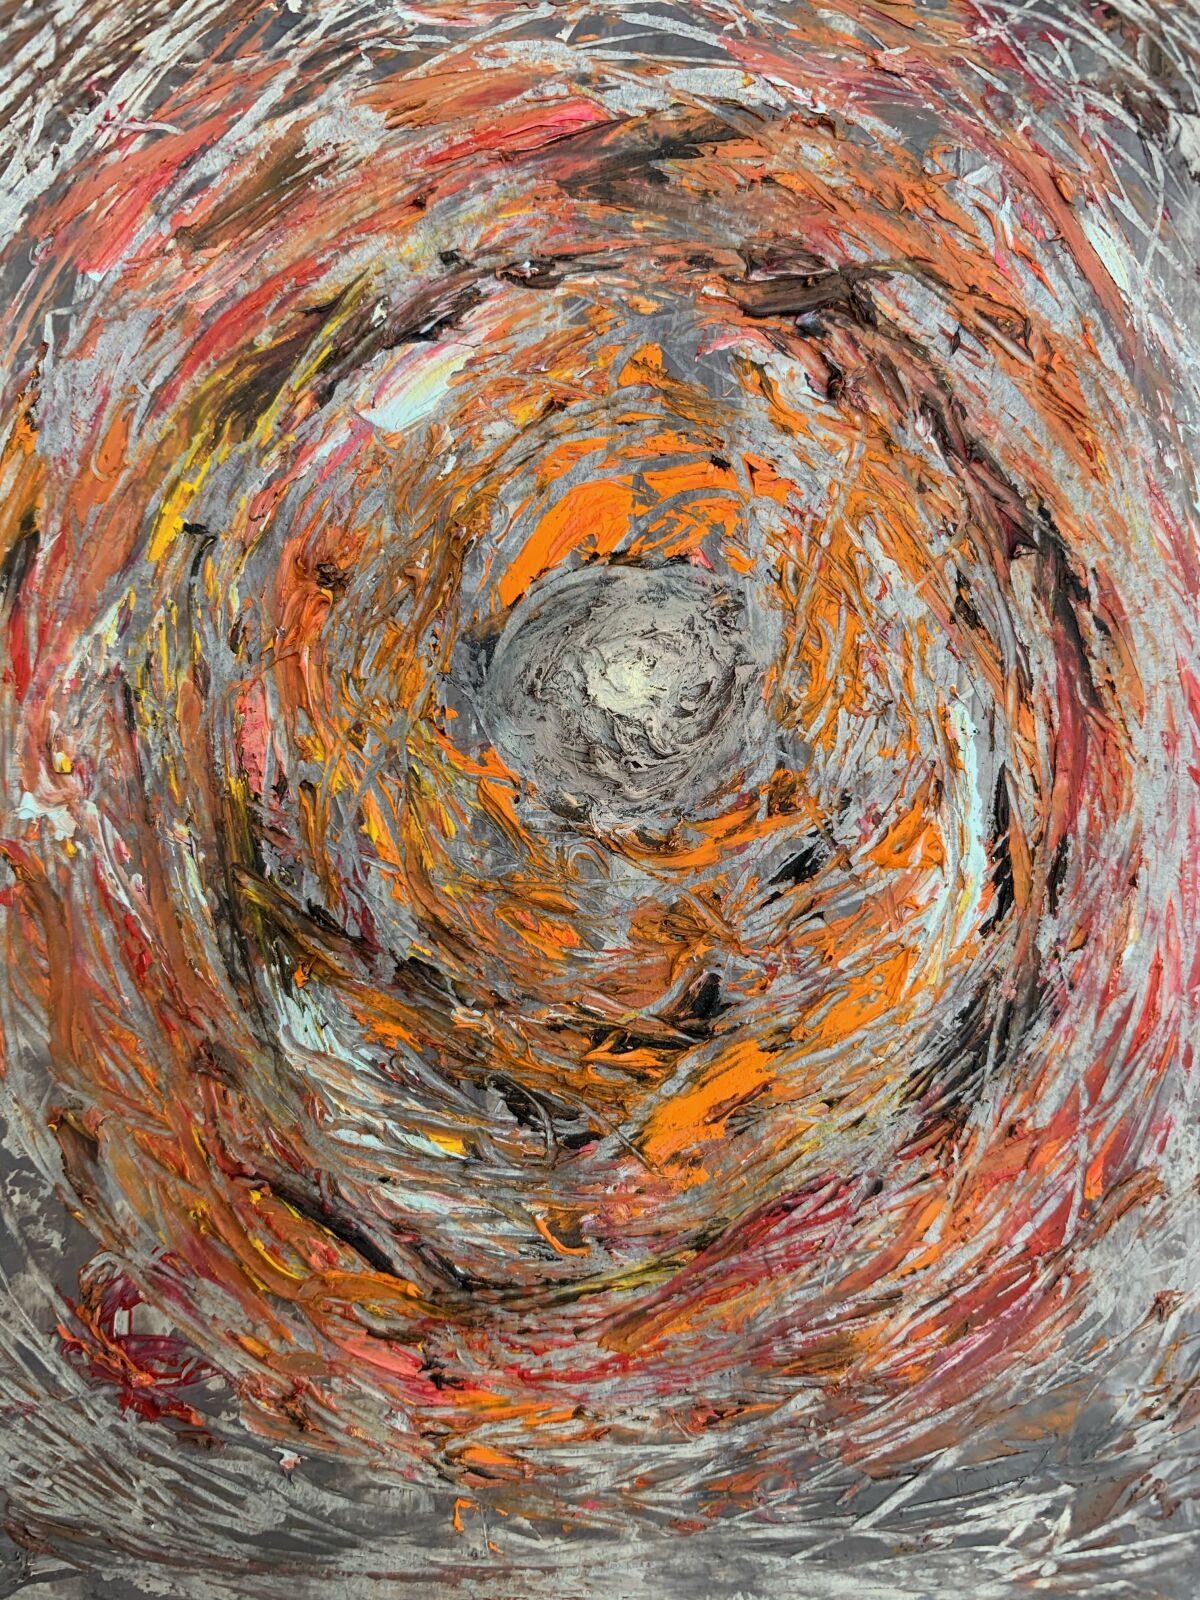 "Tunnel of COVID," a painting with swirls of gray, black, red and orange, by Dr. Michael Gibson.